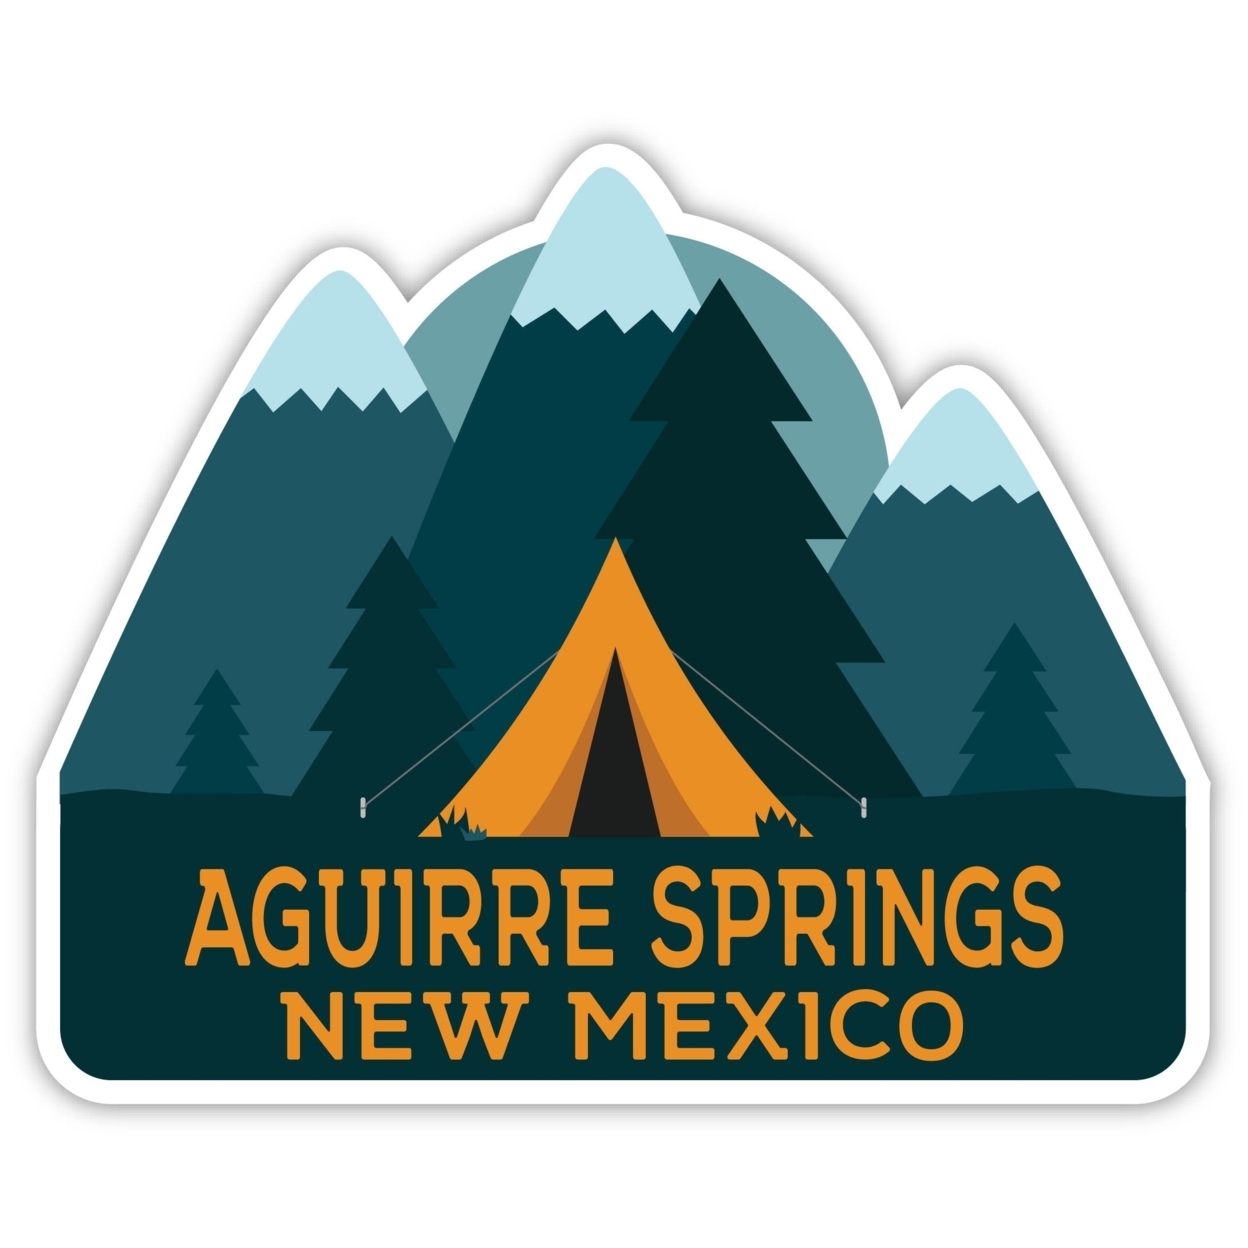 Aguirre Springs New Mexico Souvenir Decorative Stickers (Choose Theme And Size) - Single Unit, 2-Inch, Tent